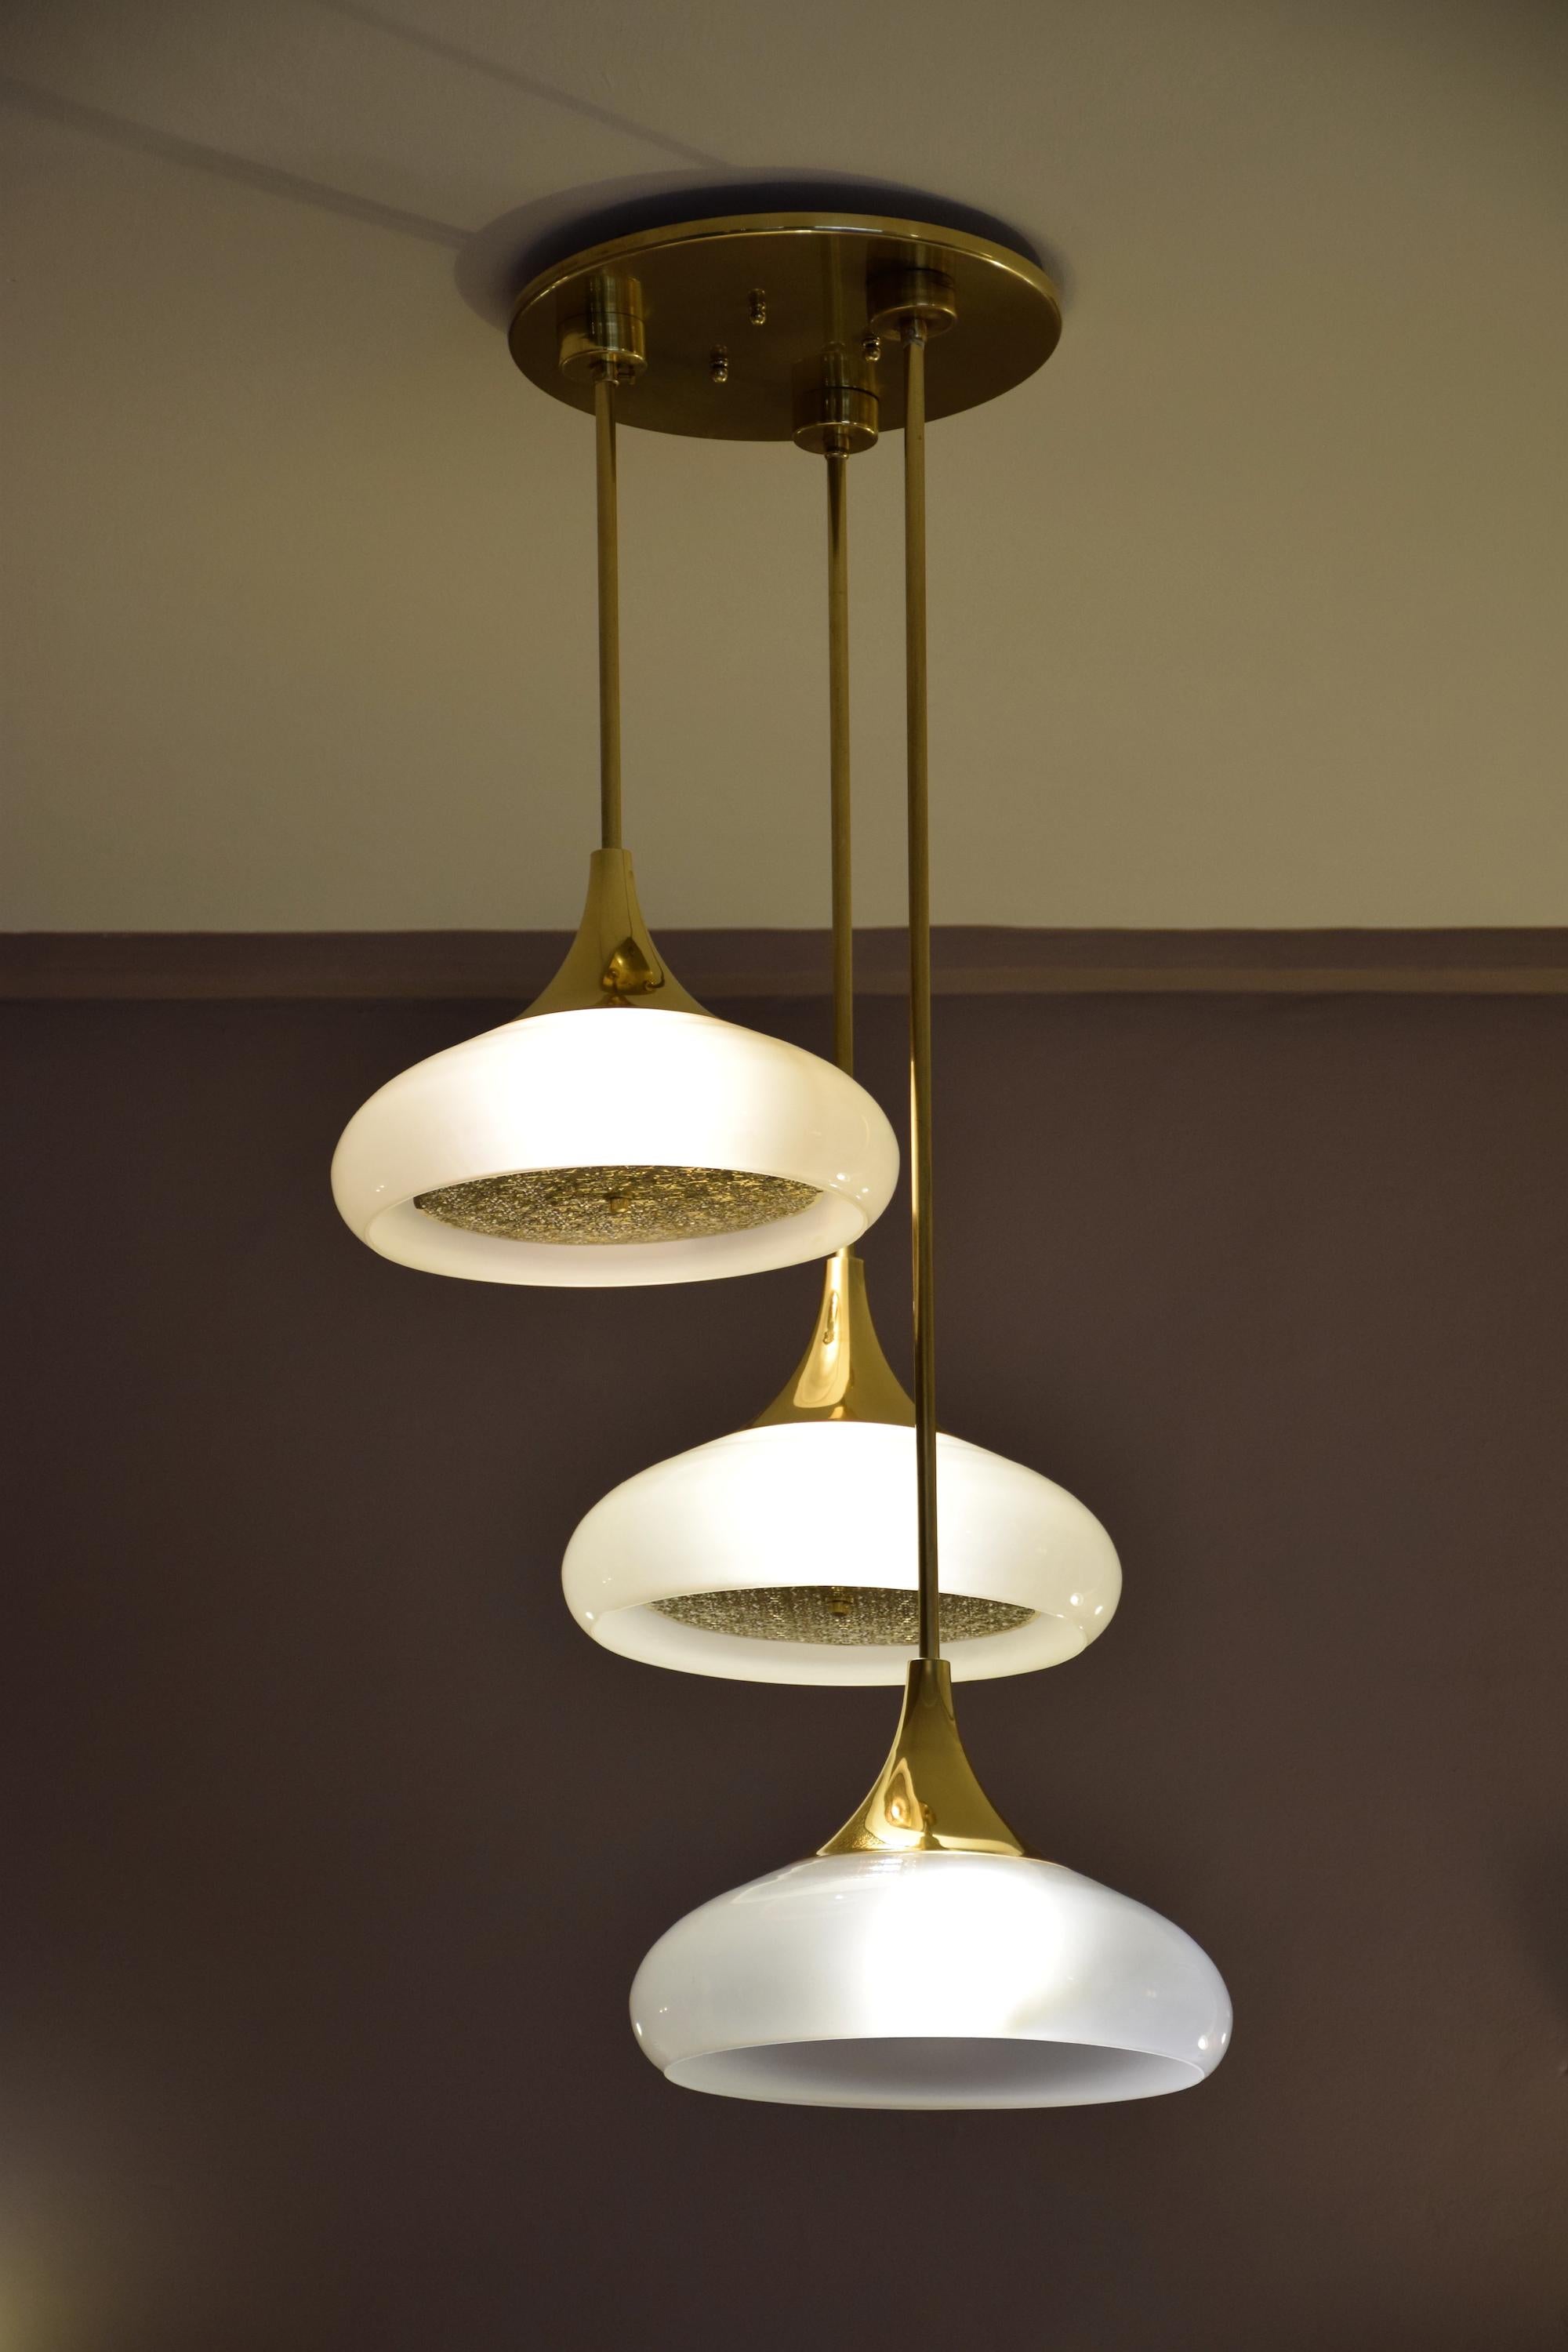 Three hanging lights designed in a solid brass structure and organic opal glass shades. The openwork brass sheets underneath are optionable.

Flow 2 by JA Studio
The inspiration behind this collection was to create modern designs with modular